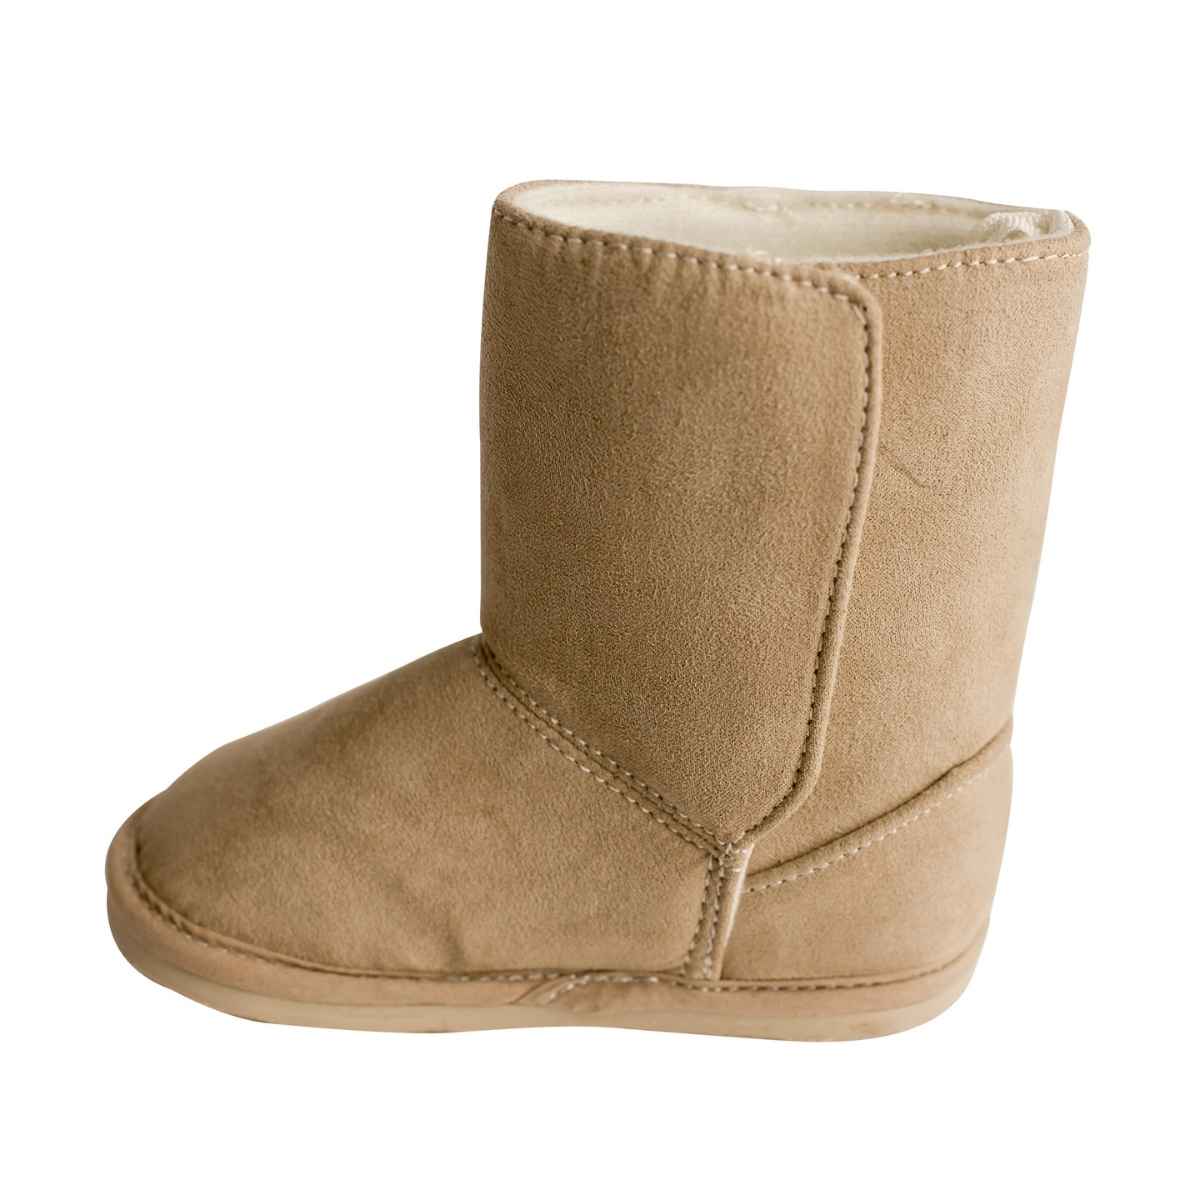 ANNABELLE Toddler Tan Faux-Suede Boots - Kids Shoe Box